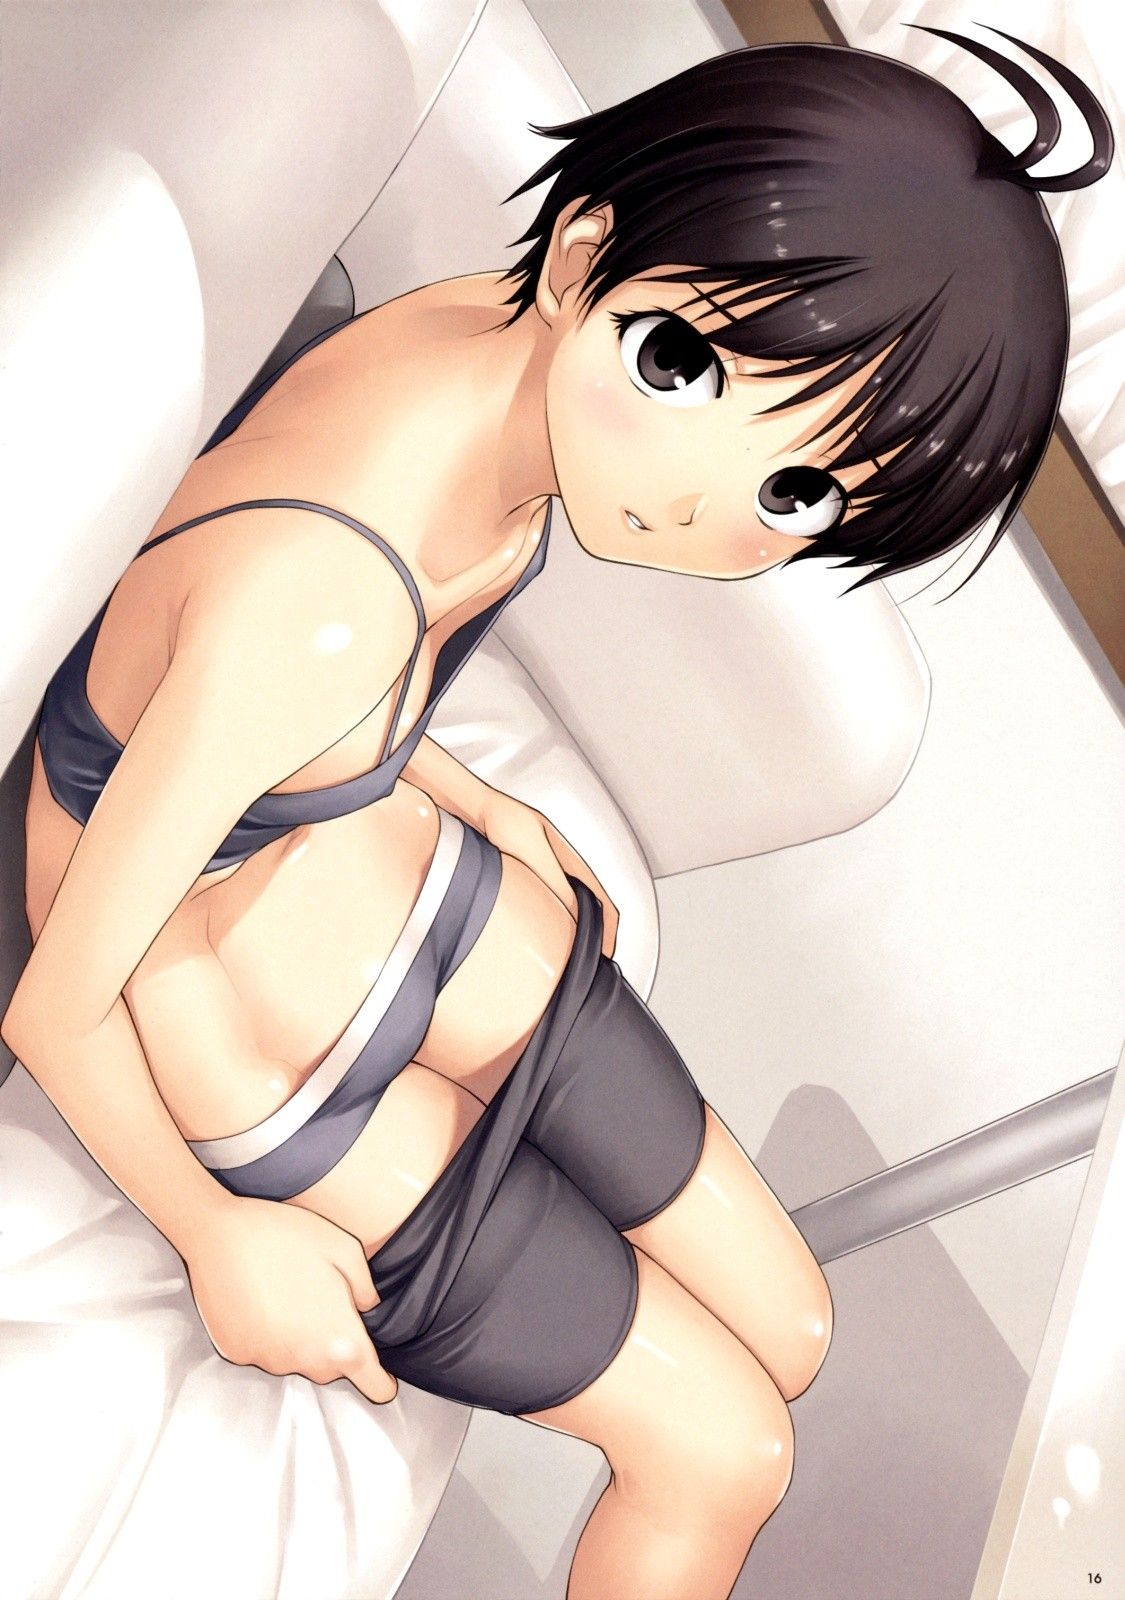 [Secondary/ZIP] The second erotic image of the girl wearing spats 12 14